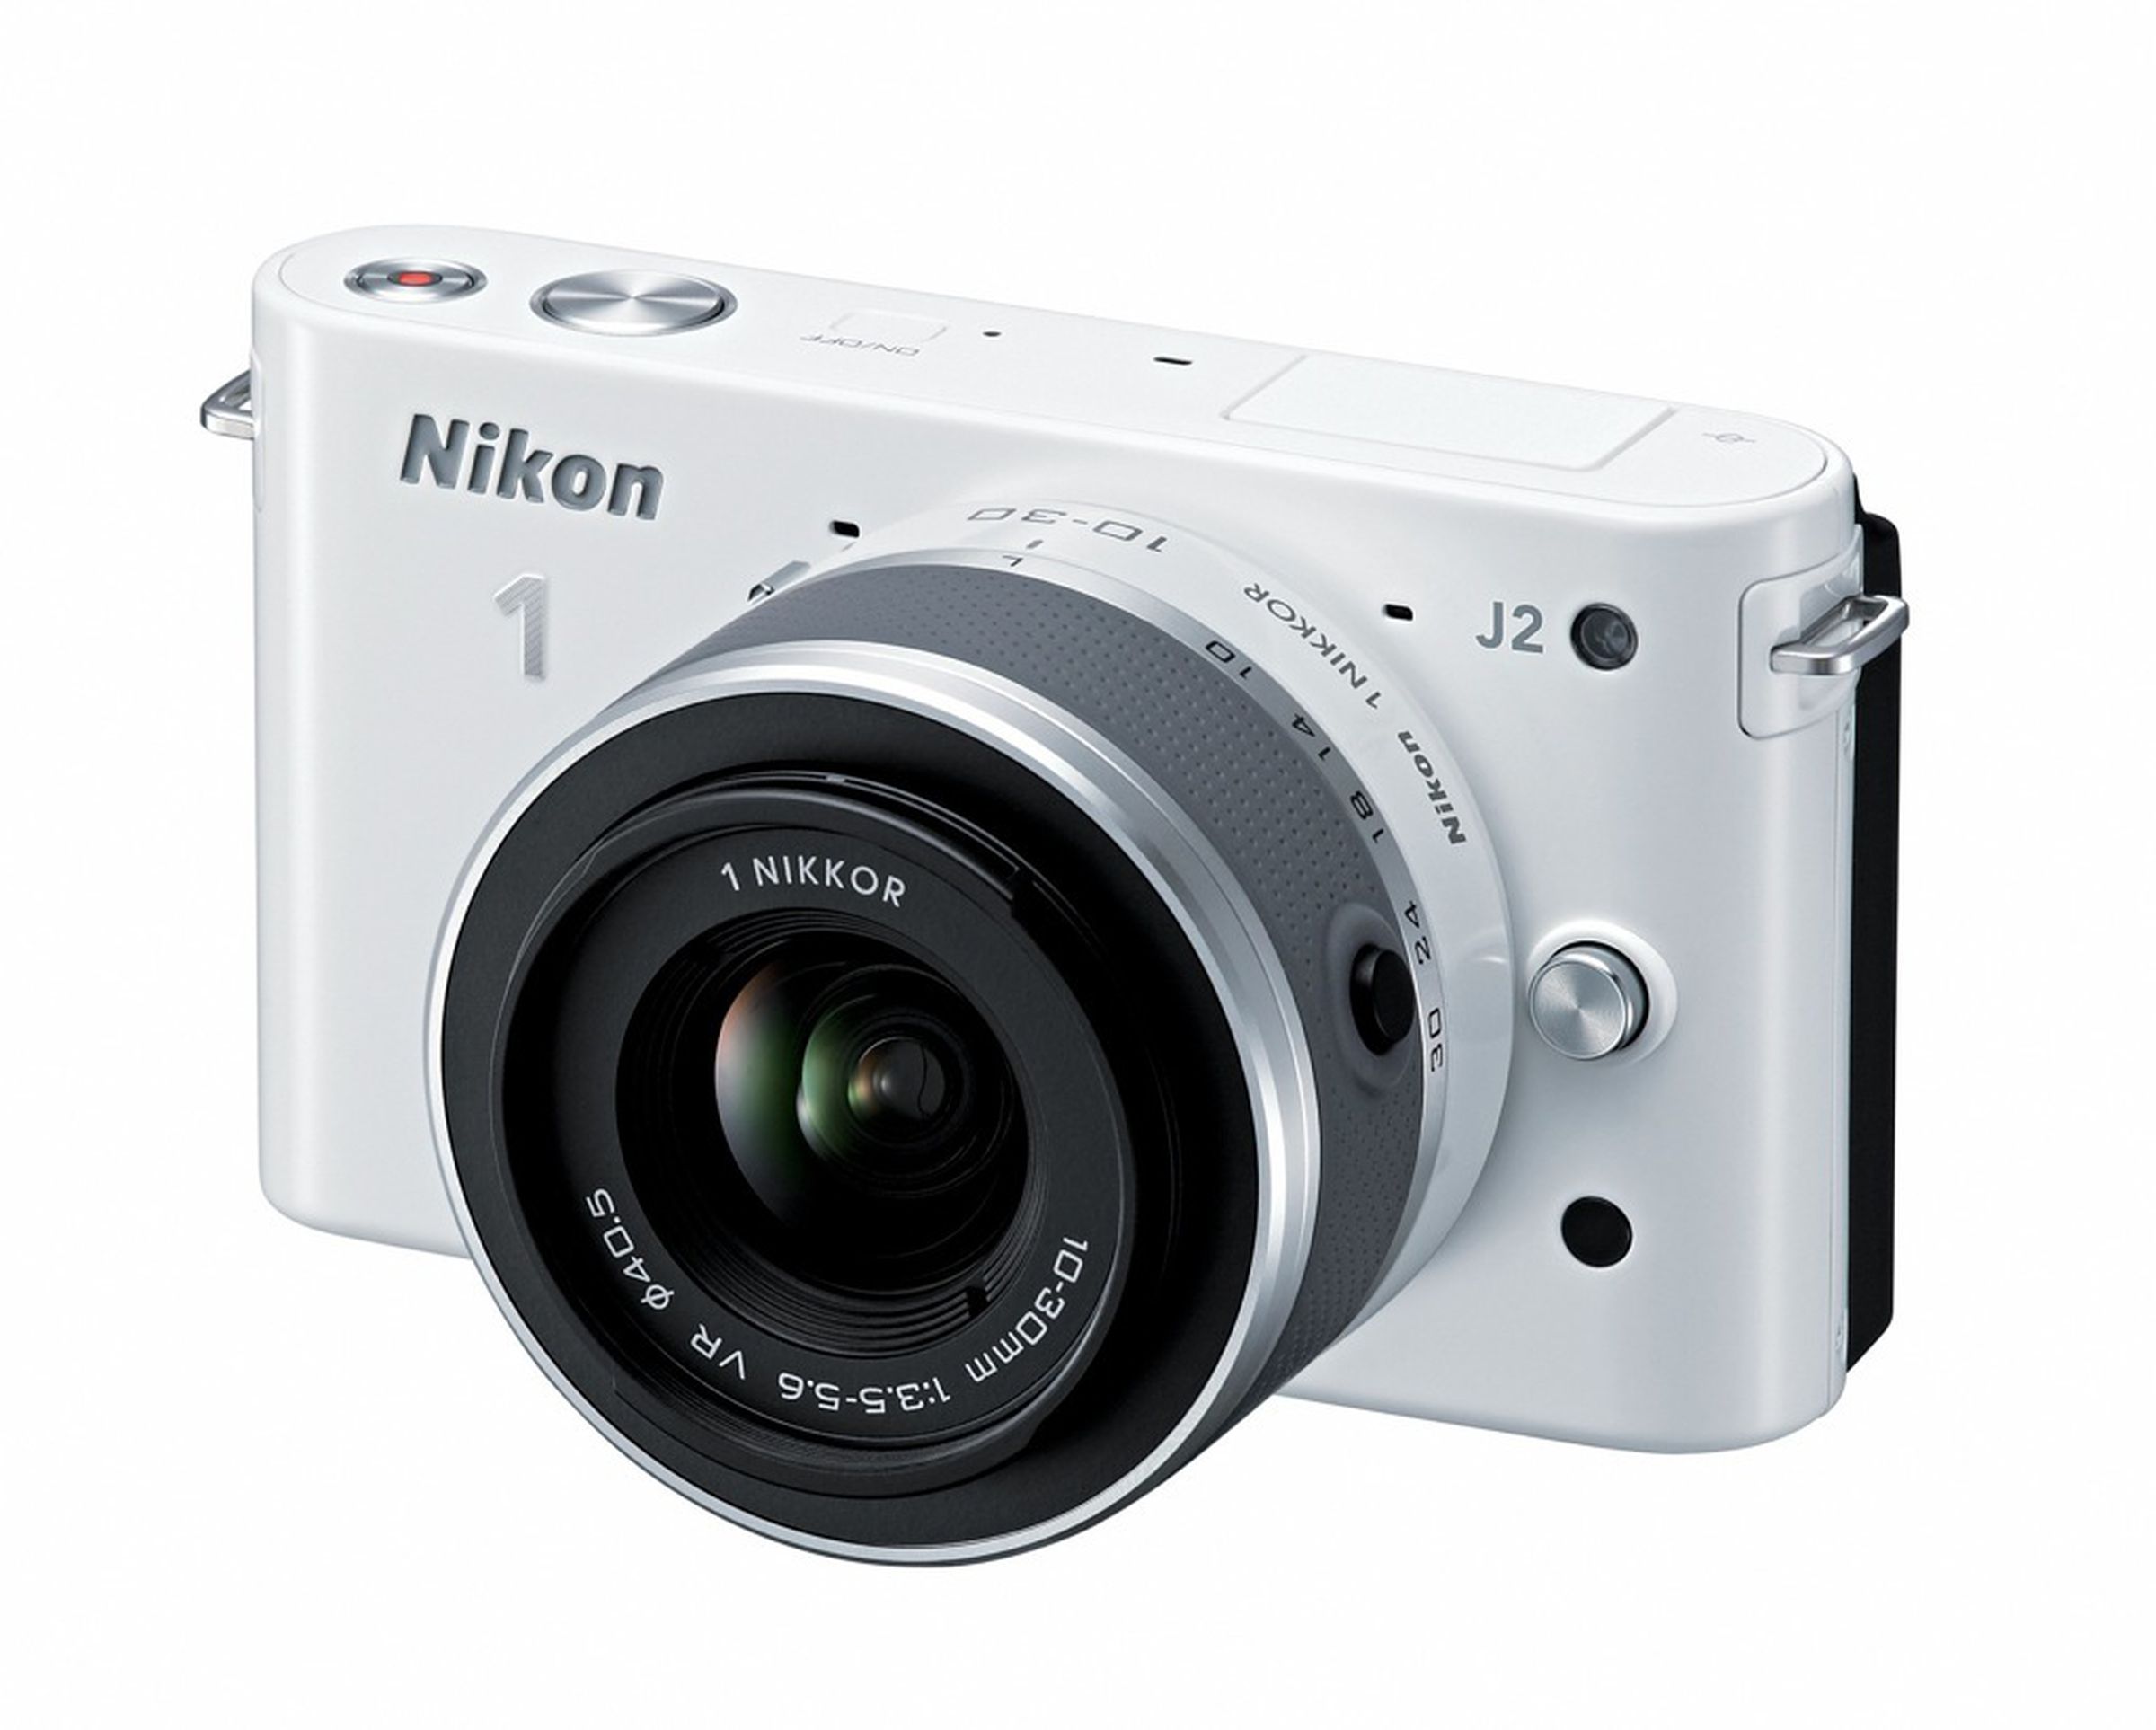 Nikon 1 J2 and accessories pictures